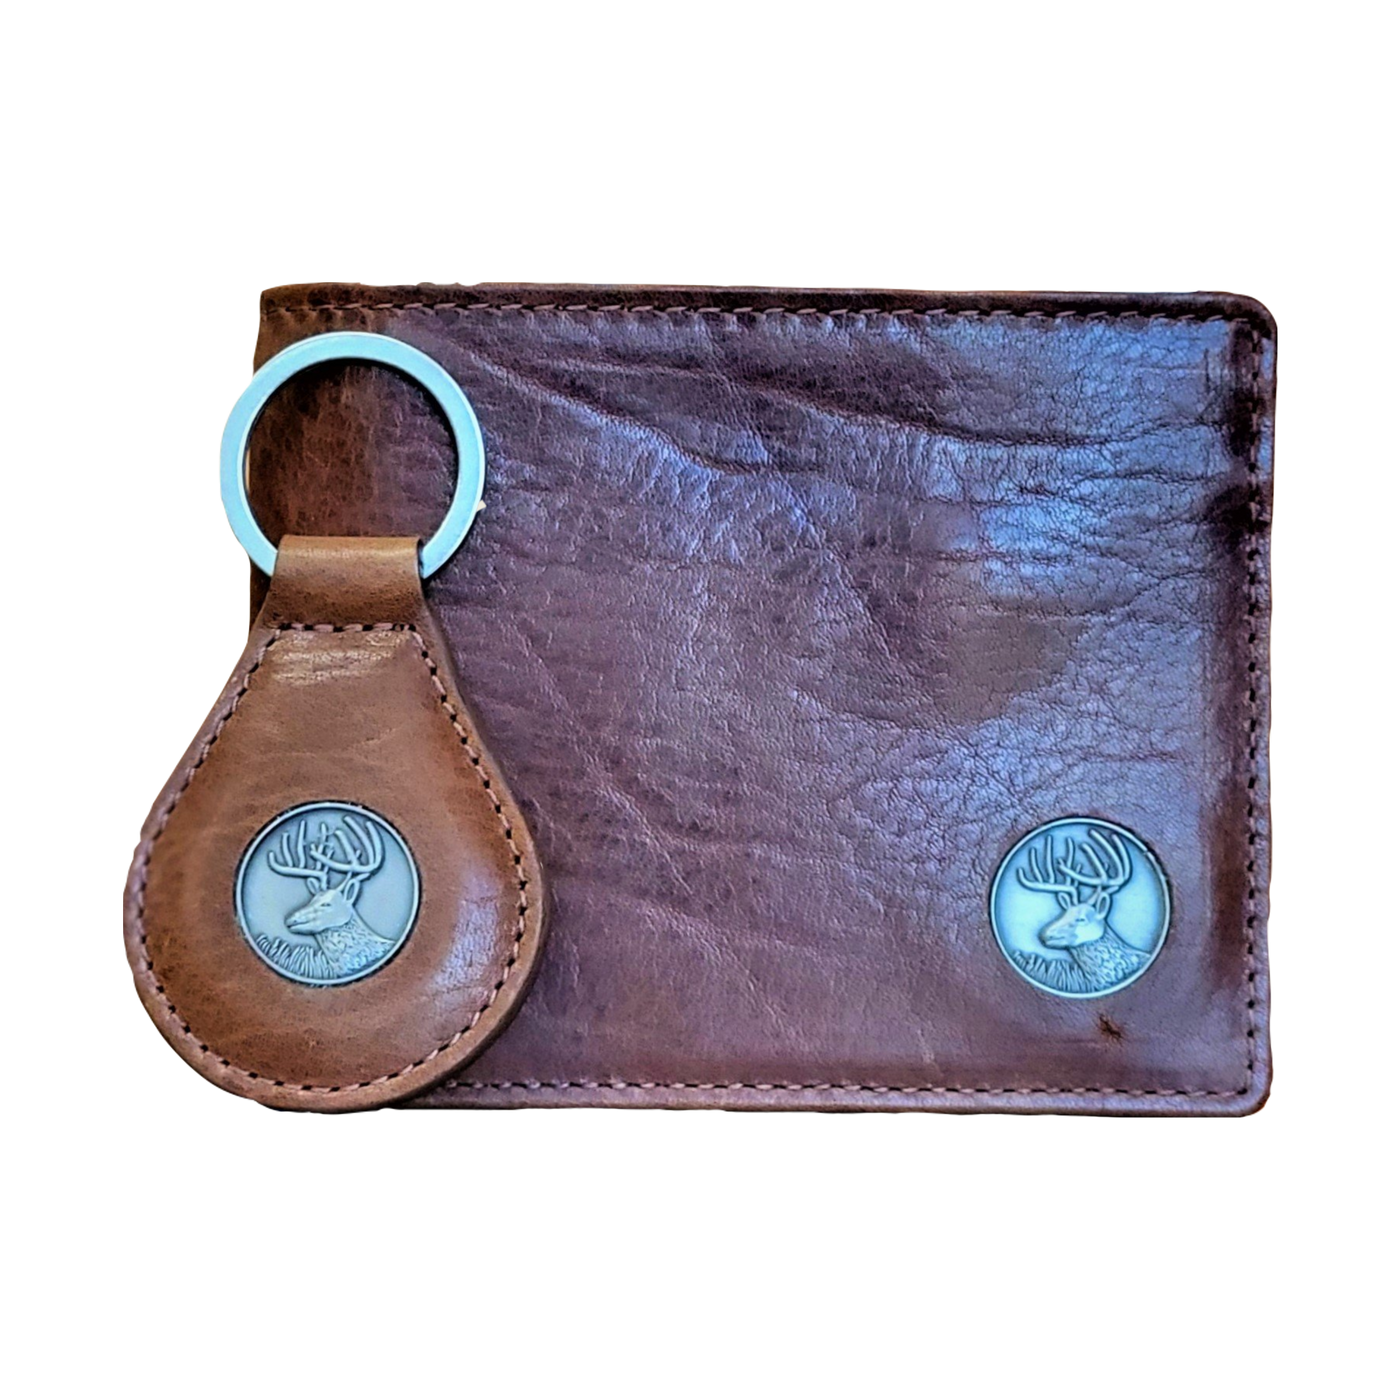 The Dynasty Bifold Buck Wallet & Keyring, harnesses the hunt for any avid outdoorsman. The premier full grain leather and hand-oiled stylish finish set this among the top for stocking stuffers. Don't miss out! 8 Card Slots 2 Storage Pockets Leather Tipped Bill Divider Signature Buck Concho Dimensions: 4.5"L x 3.5"H RFID Protection Color: Brown